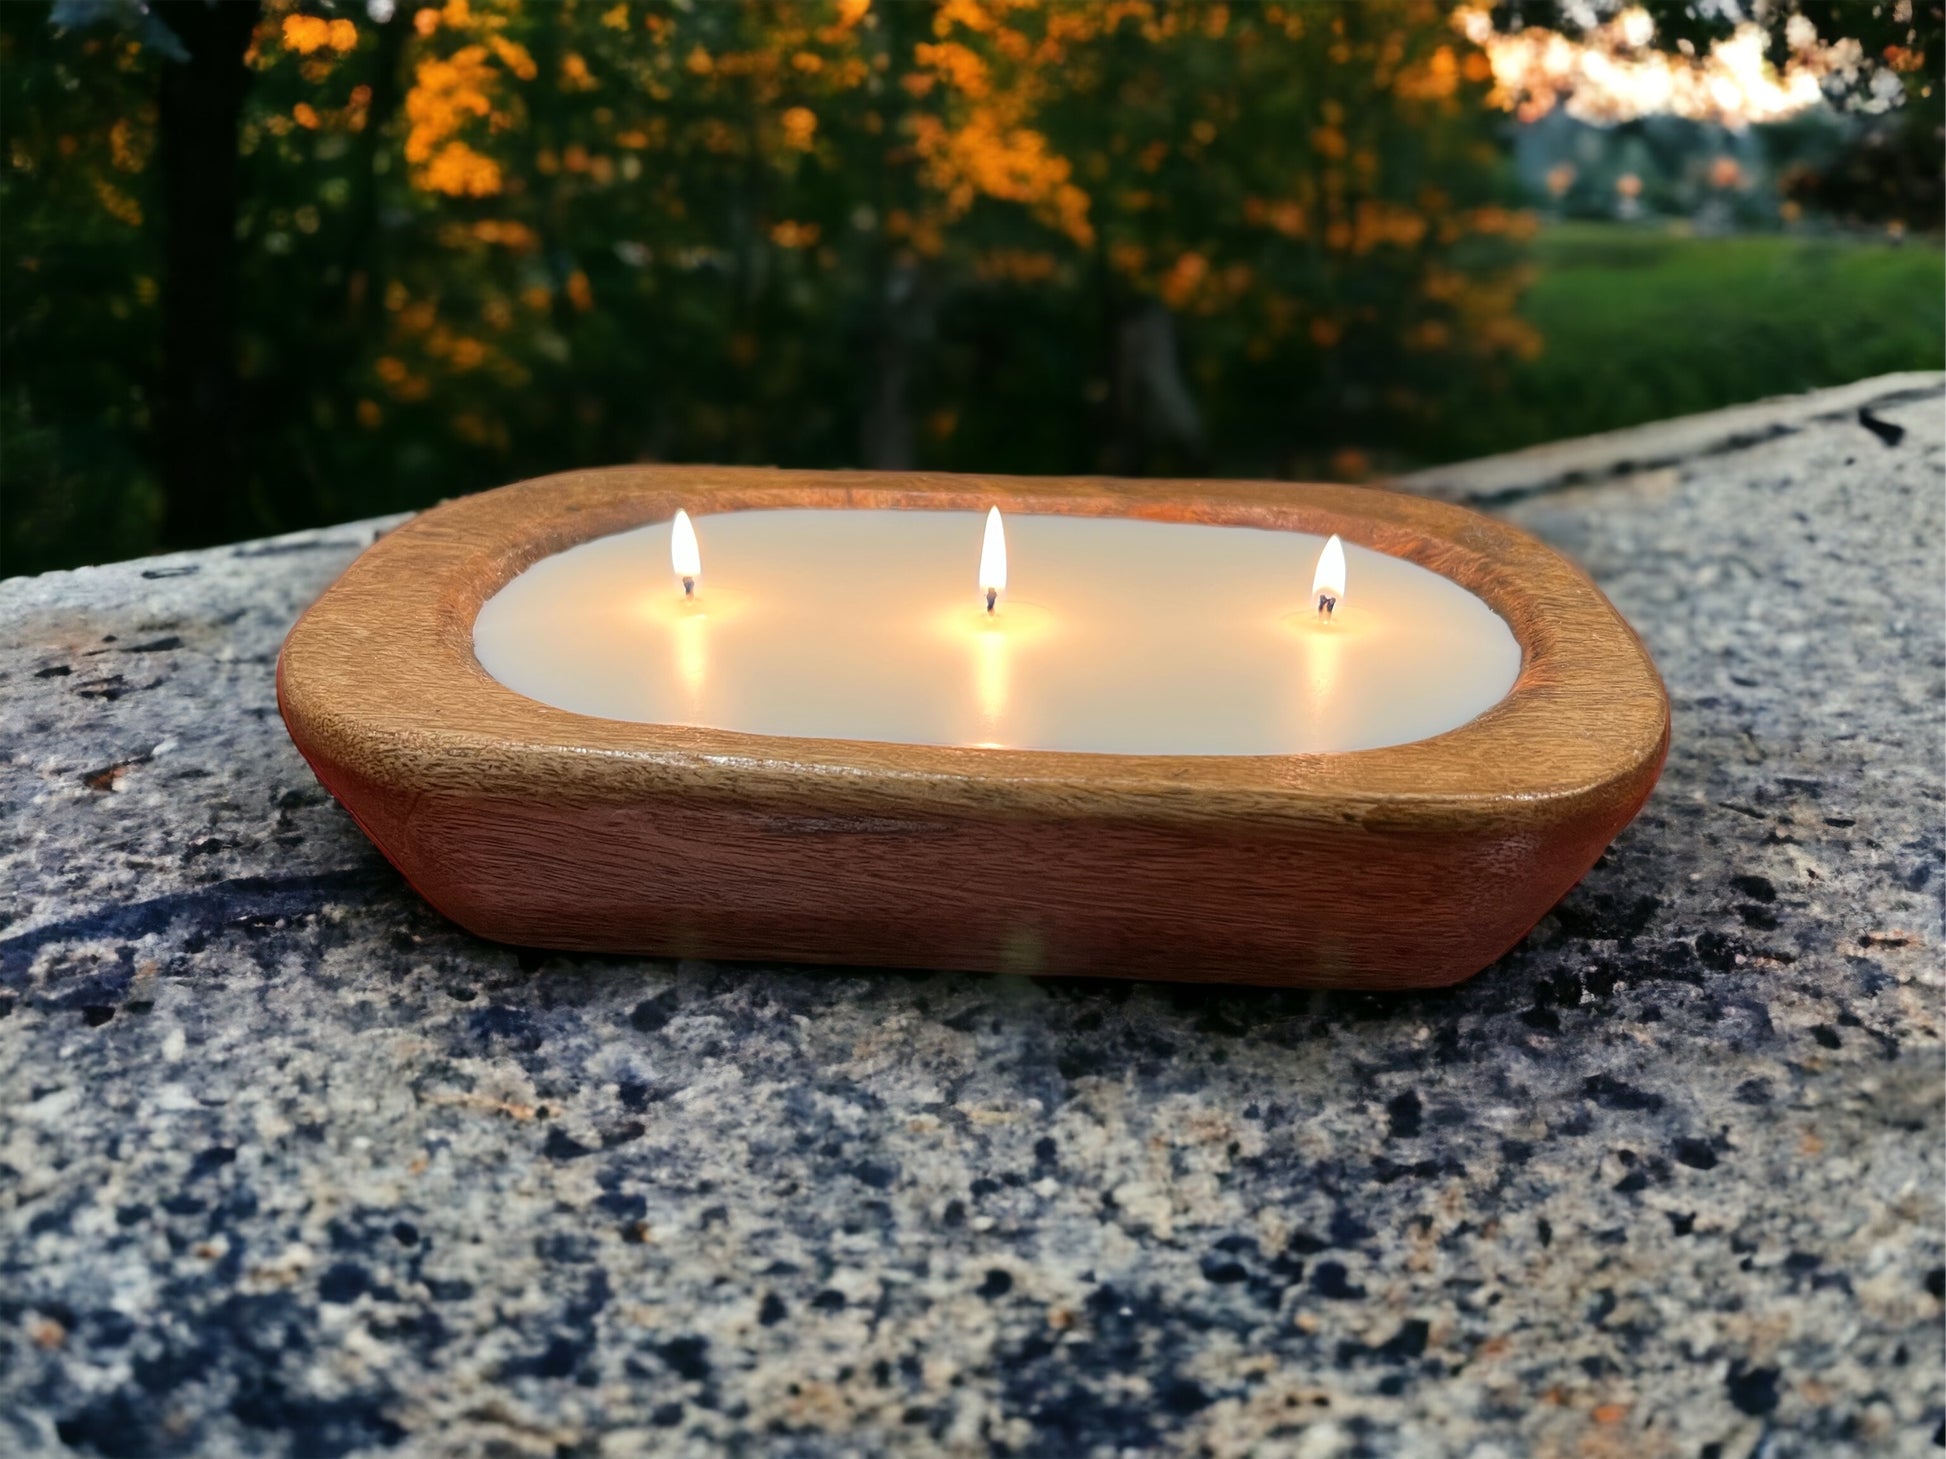 Handcrafted Wooden Dough Bowl Candles a Rustic Glow of Elegance – Young Soul